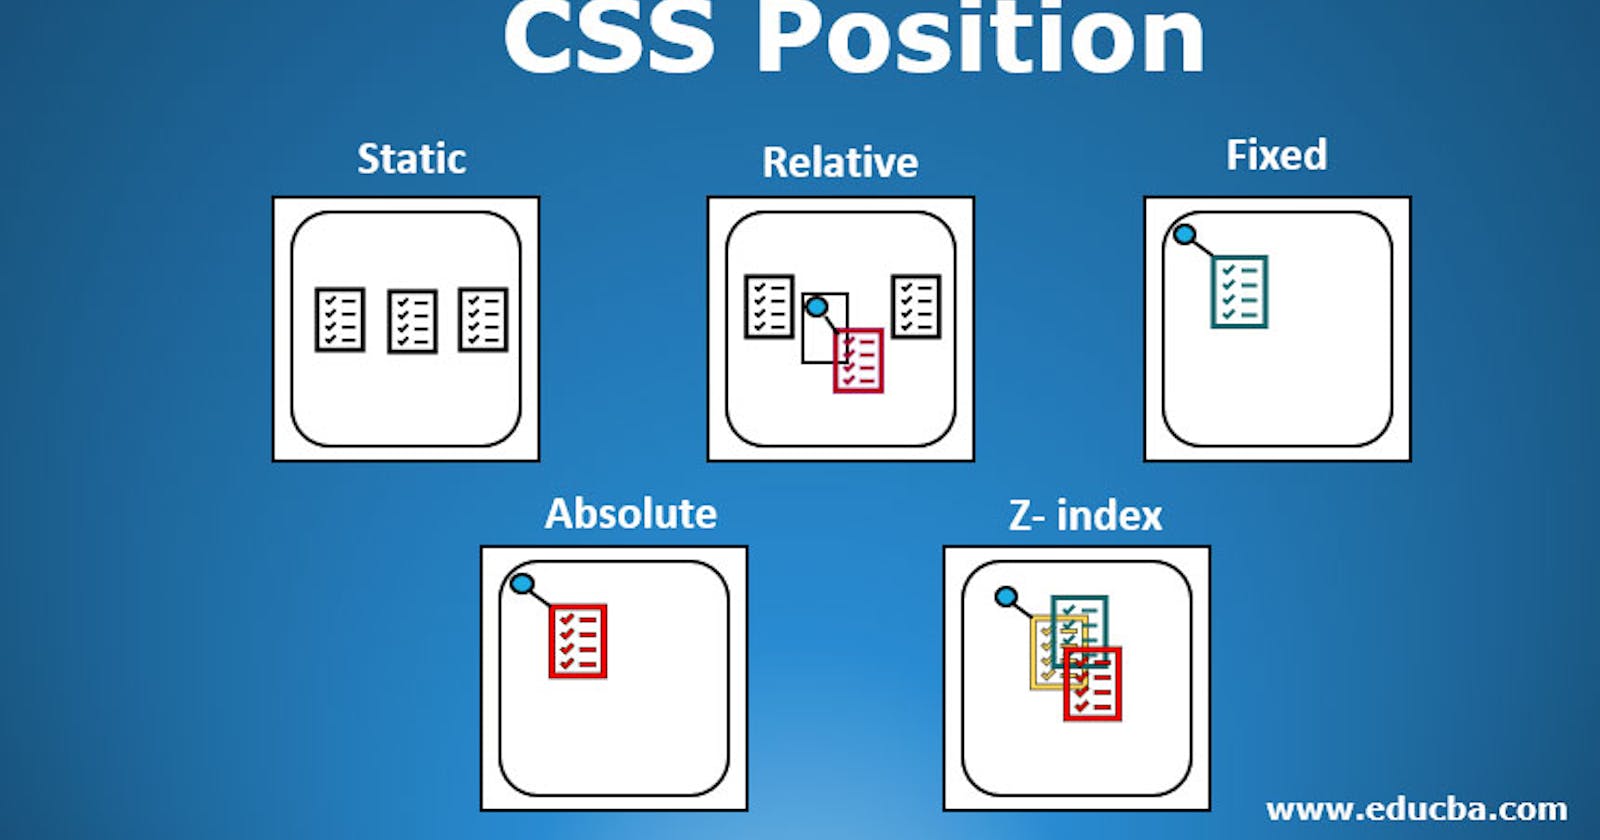 The Ultimate shite for CSS Positions